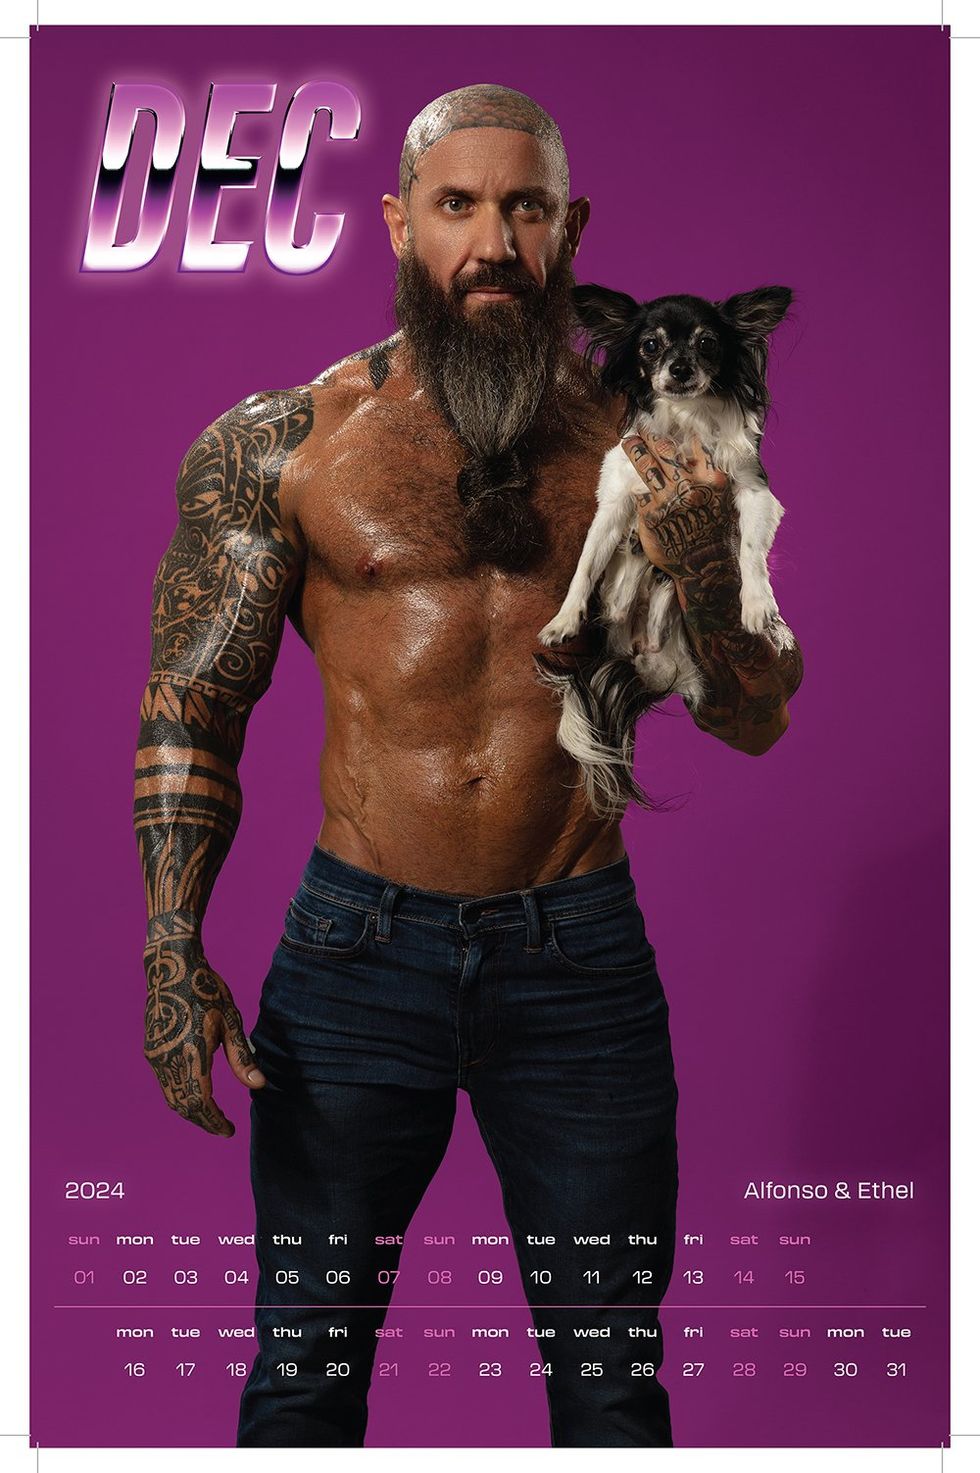 Get Ready to Pant and Beg for the New \u2018Hunks & Hounds\u2019 Calendar from Mike Ruiz \u2013 December \u2013 Alfonso and Ethel